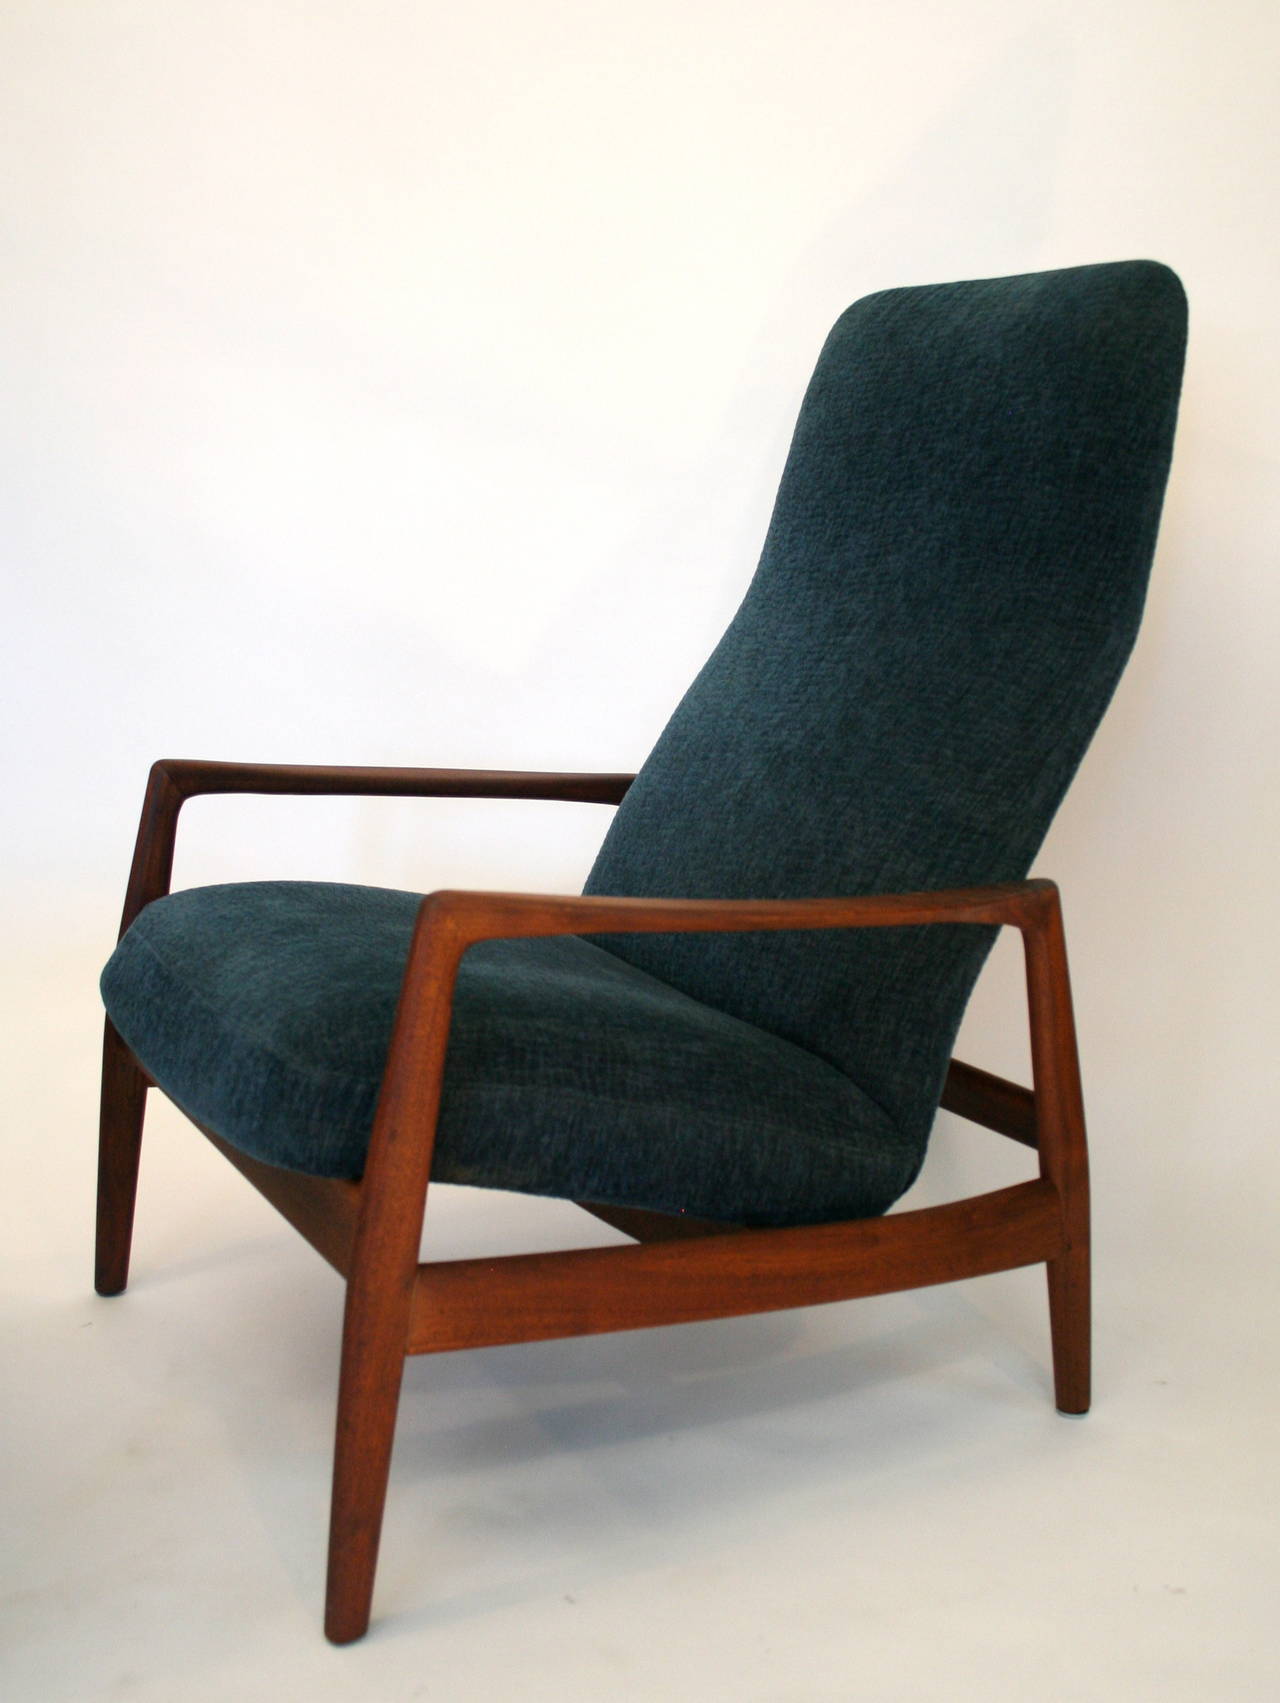 Swedish Highback Lounge Chair and Ottoman by Folke Ohlsson for Dux